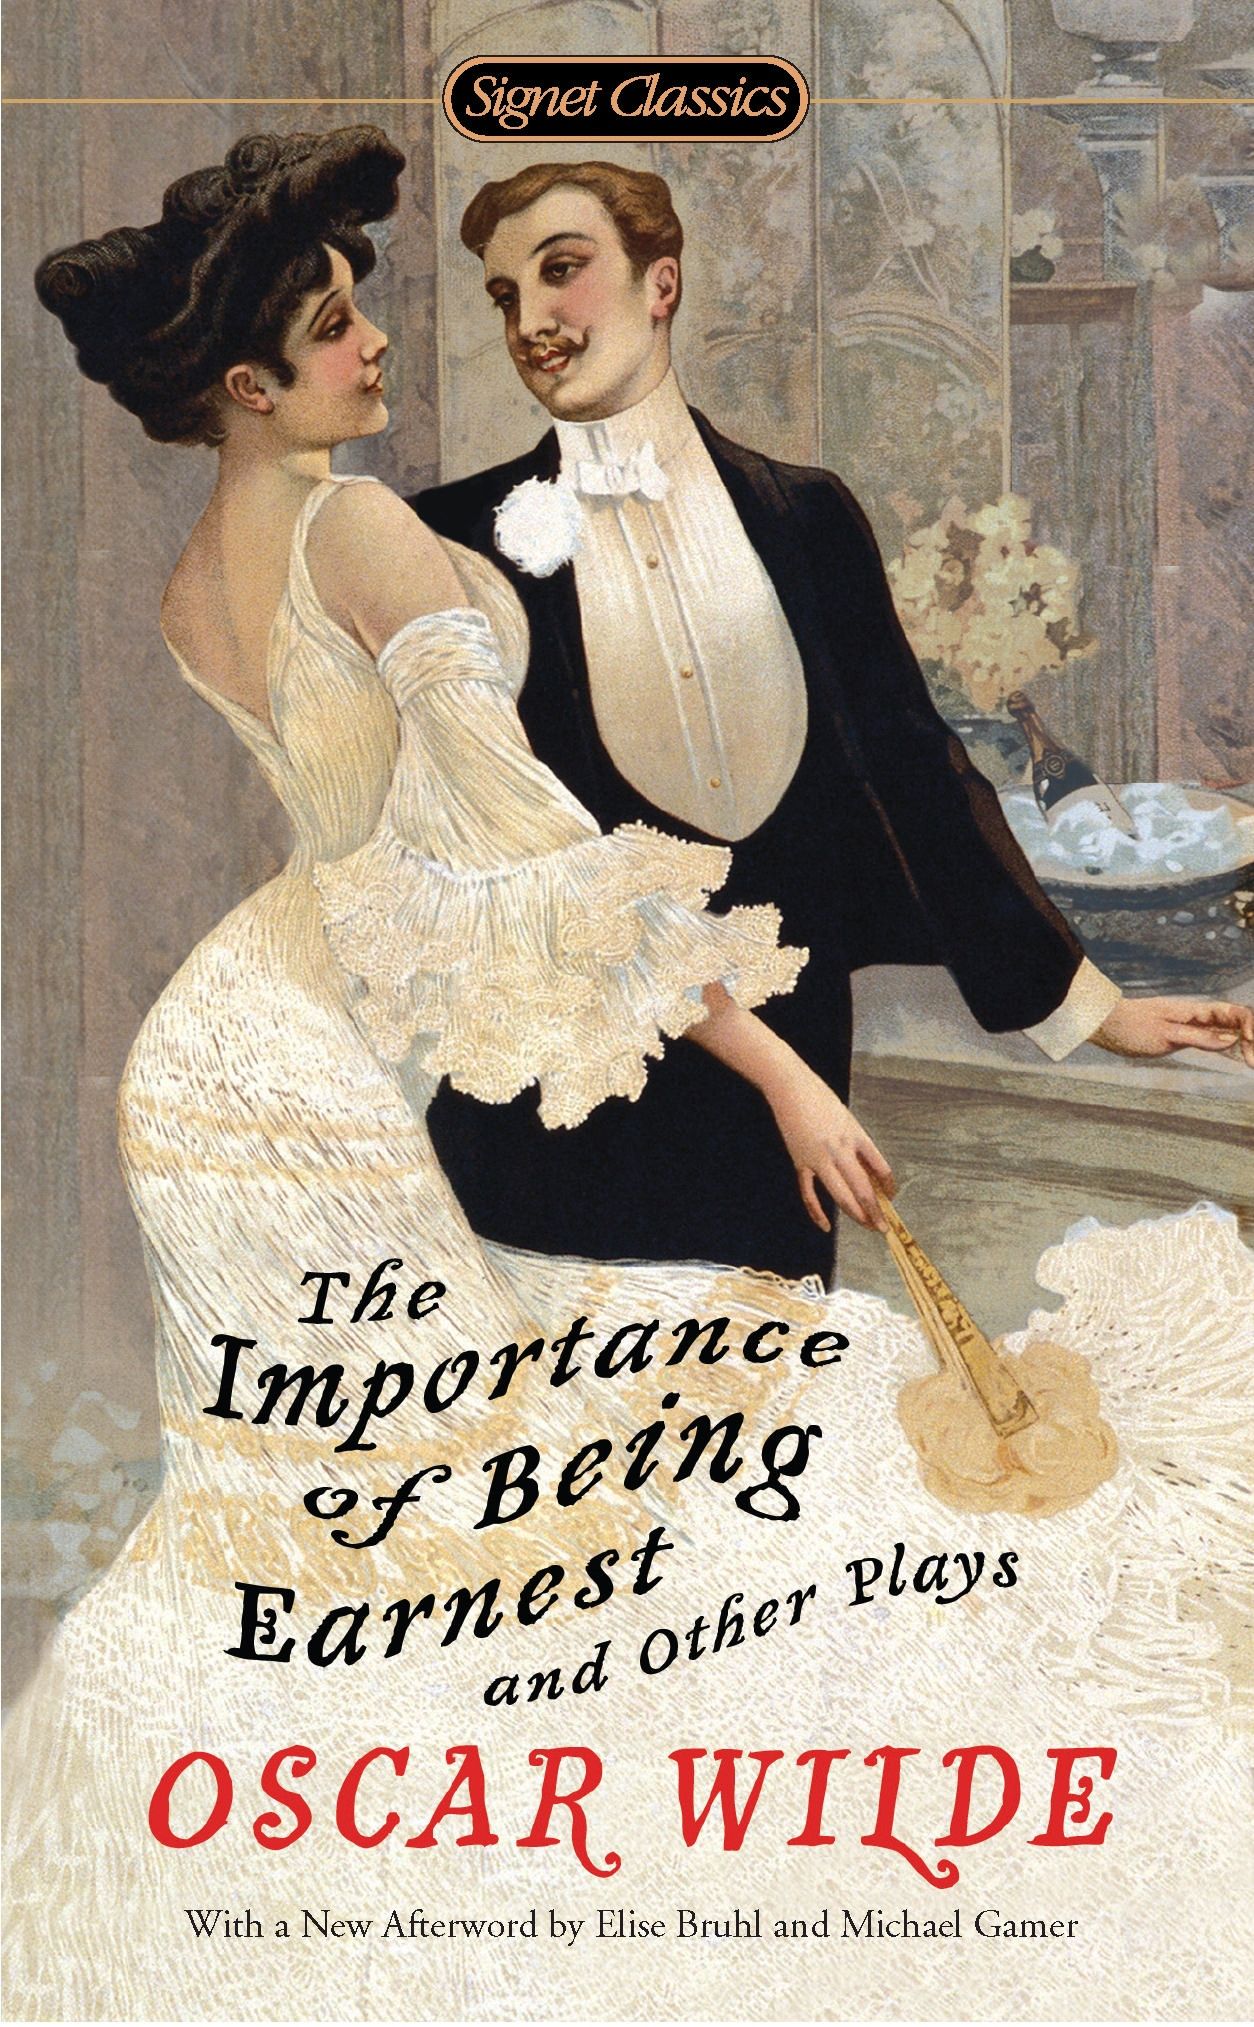 Wilde Oscar The Importance of Being Earnest and Other Plays 